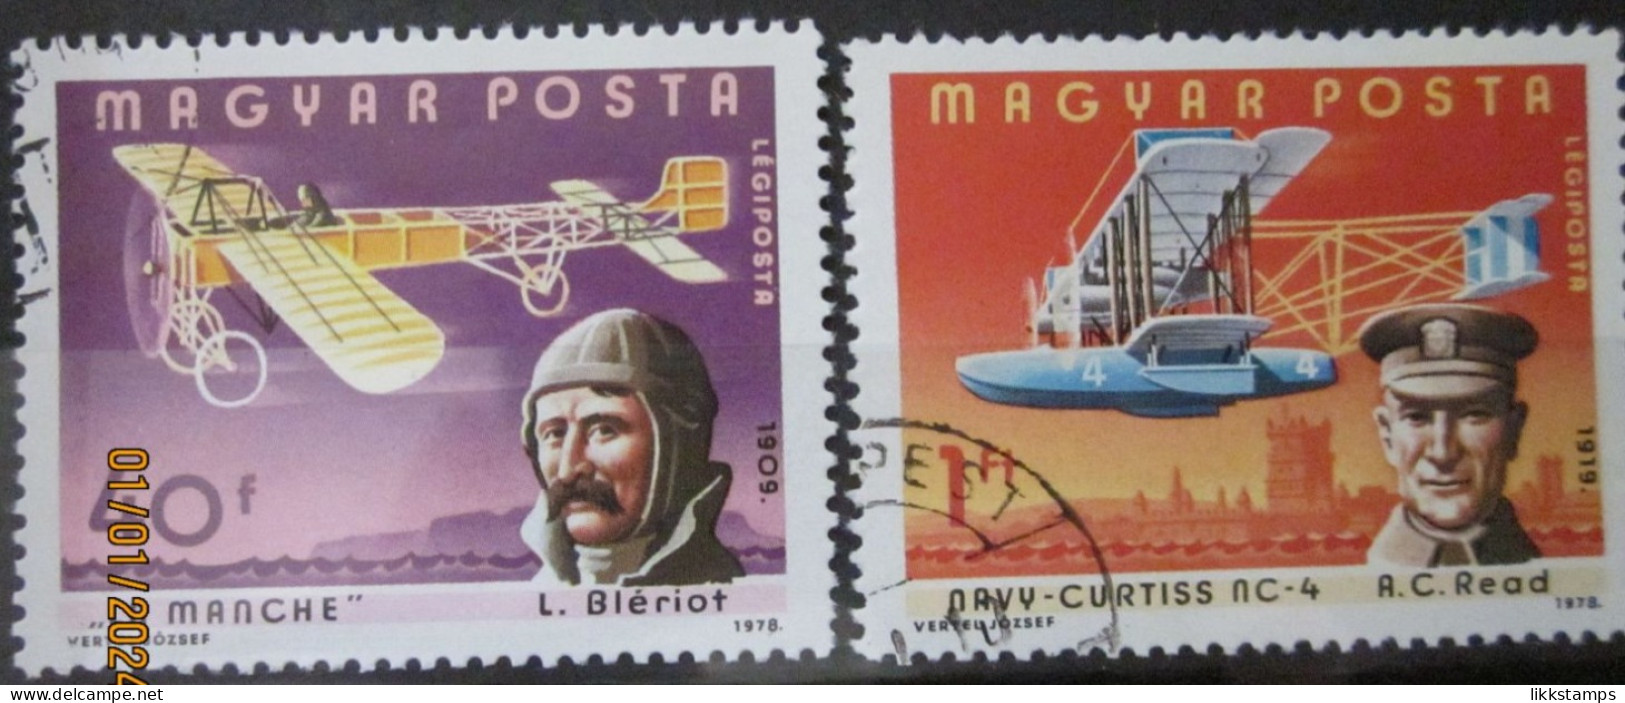 HUNGARY ~ 1978 ~ S.G. NUMBERS 3177 + 3179, ~ AVIATORS AND AIRCRAFT. ~ VFU #03034 - Used Stamps